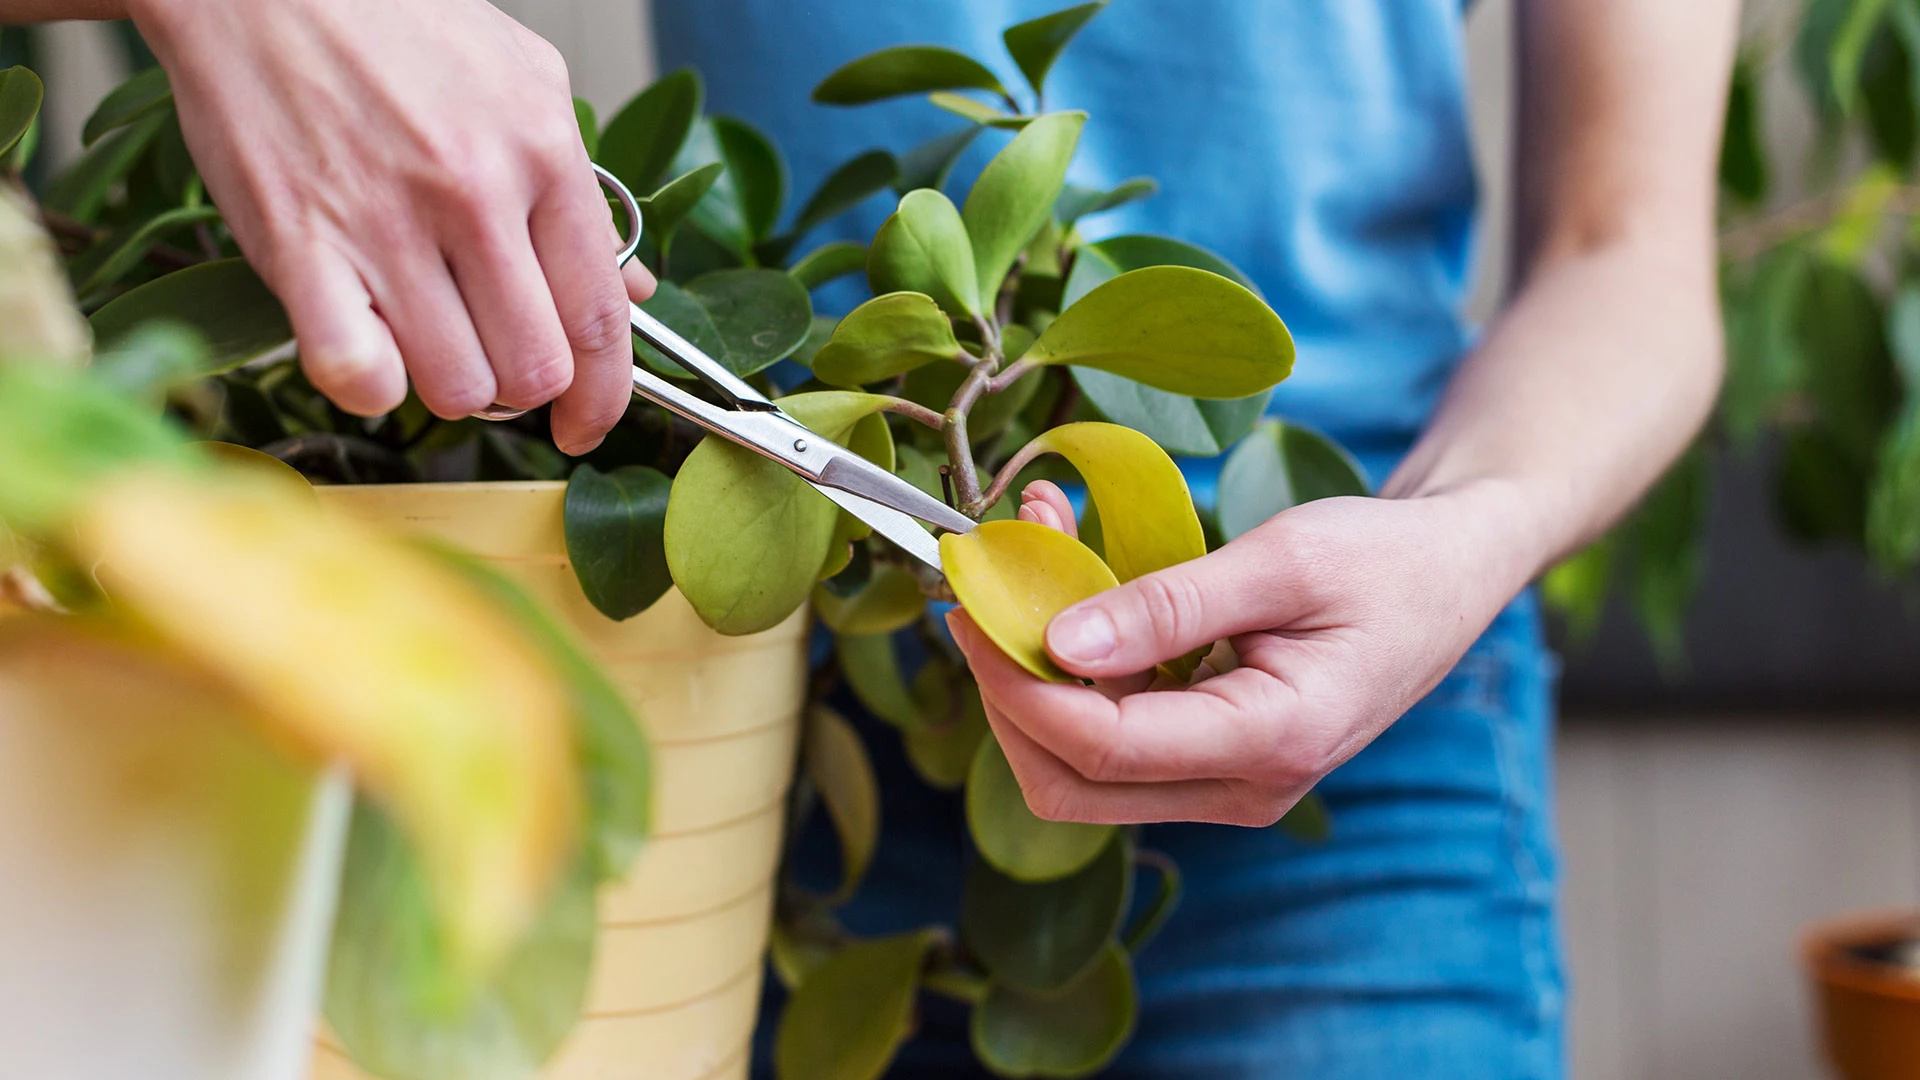 Keep Your Plants Healthy & Looking Their Best by Trimming & Pruning Them